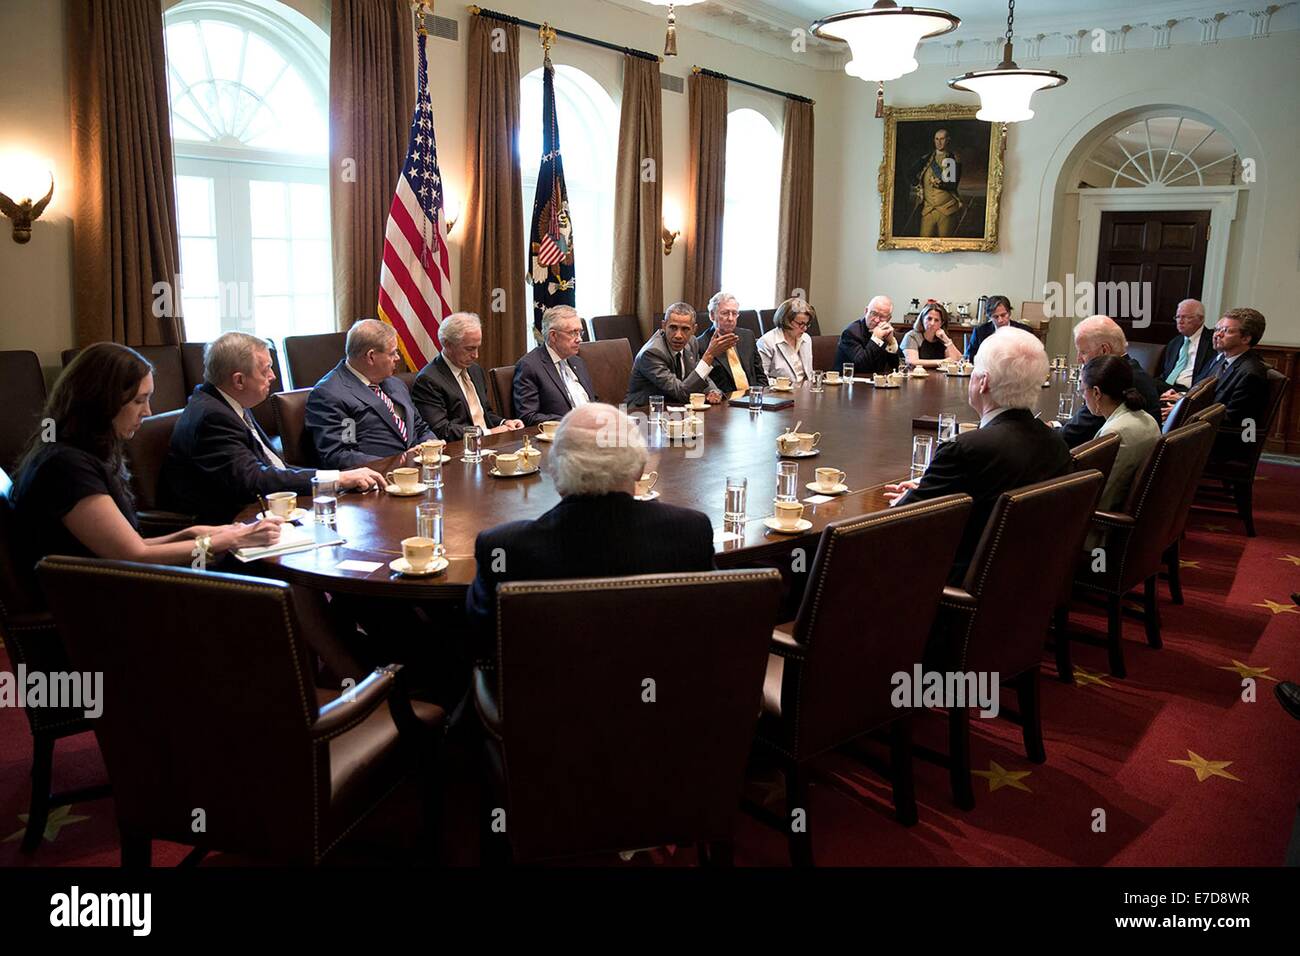 US President Barack Obama and Vice President Joe Biden meet with bicameral congressional leaders to consult with them about ongoing efforts to respond to the conflicts in Ukraine, Iraq, Gaza, Syria, and other issues, in the Cabinet Room of the White House July 31, 2014 in Washington, DC. Stock Photo